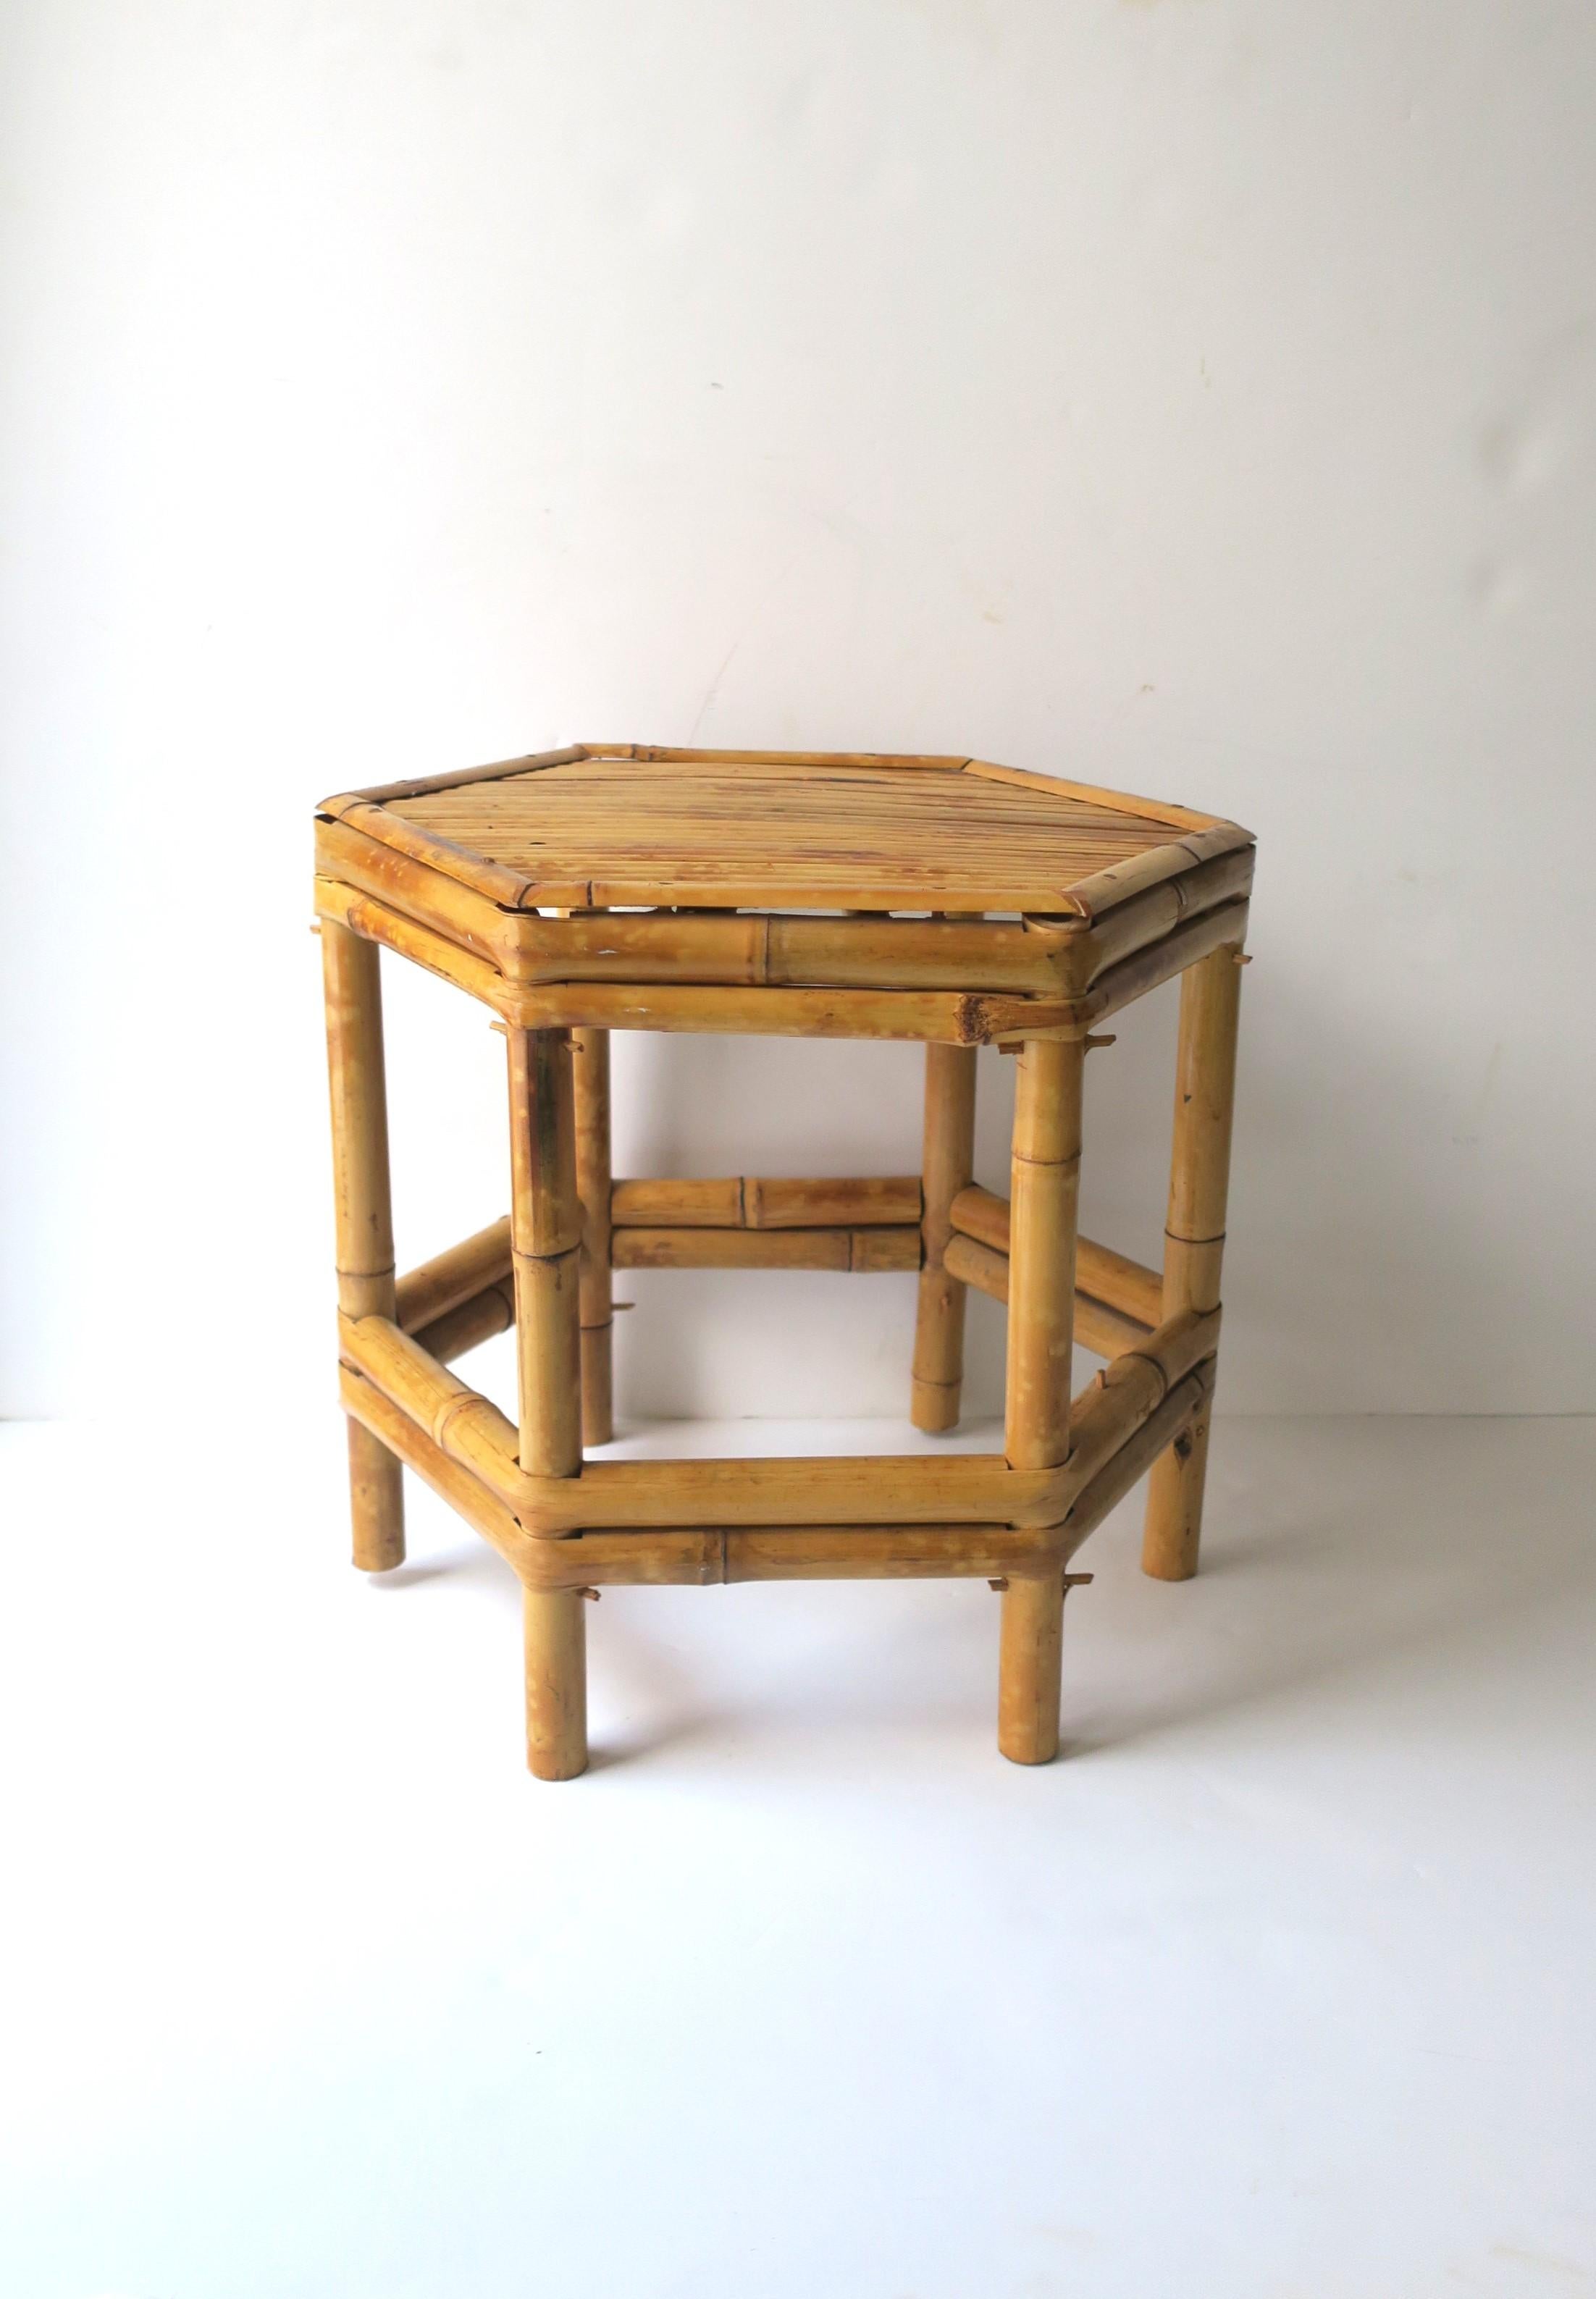 20th Century Wicker Bamboo Pedestal Table or Plant Stand Chinoiserie Style